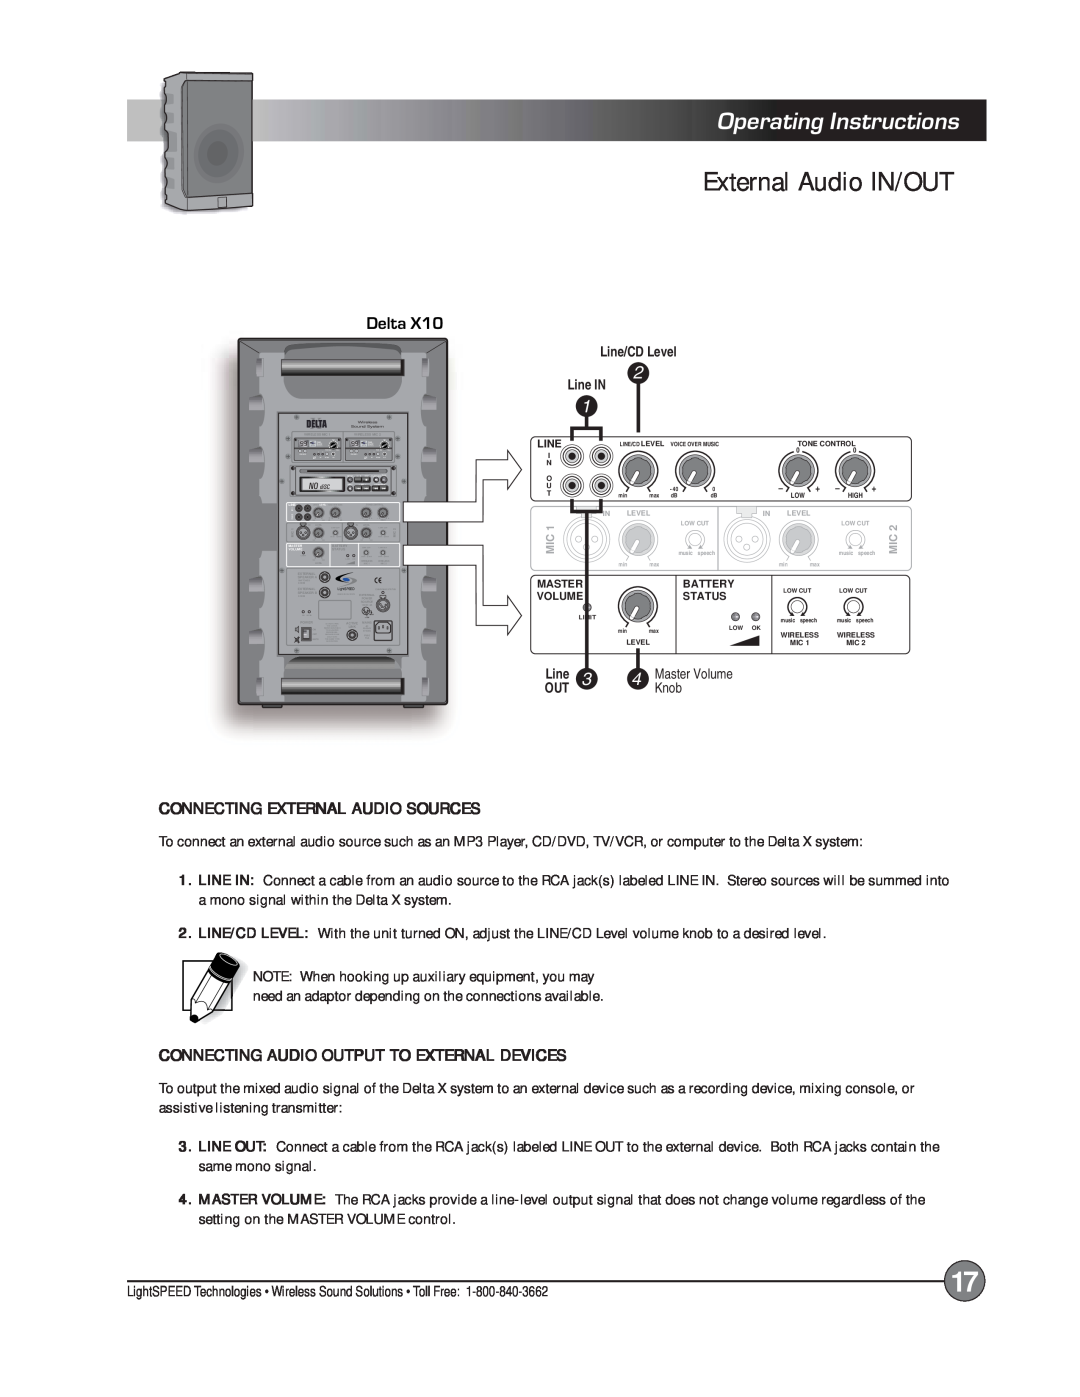 LightSpeed Technologies Delta X10, X12 External Audio IN/OUT, Operating Instructions, Connecting External Audio Sources 